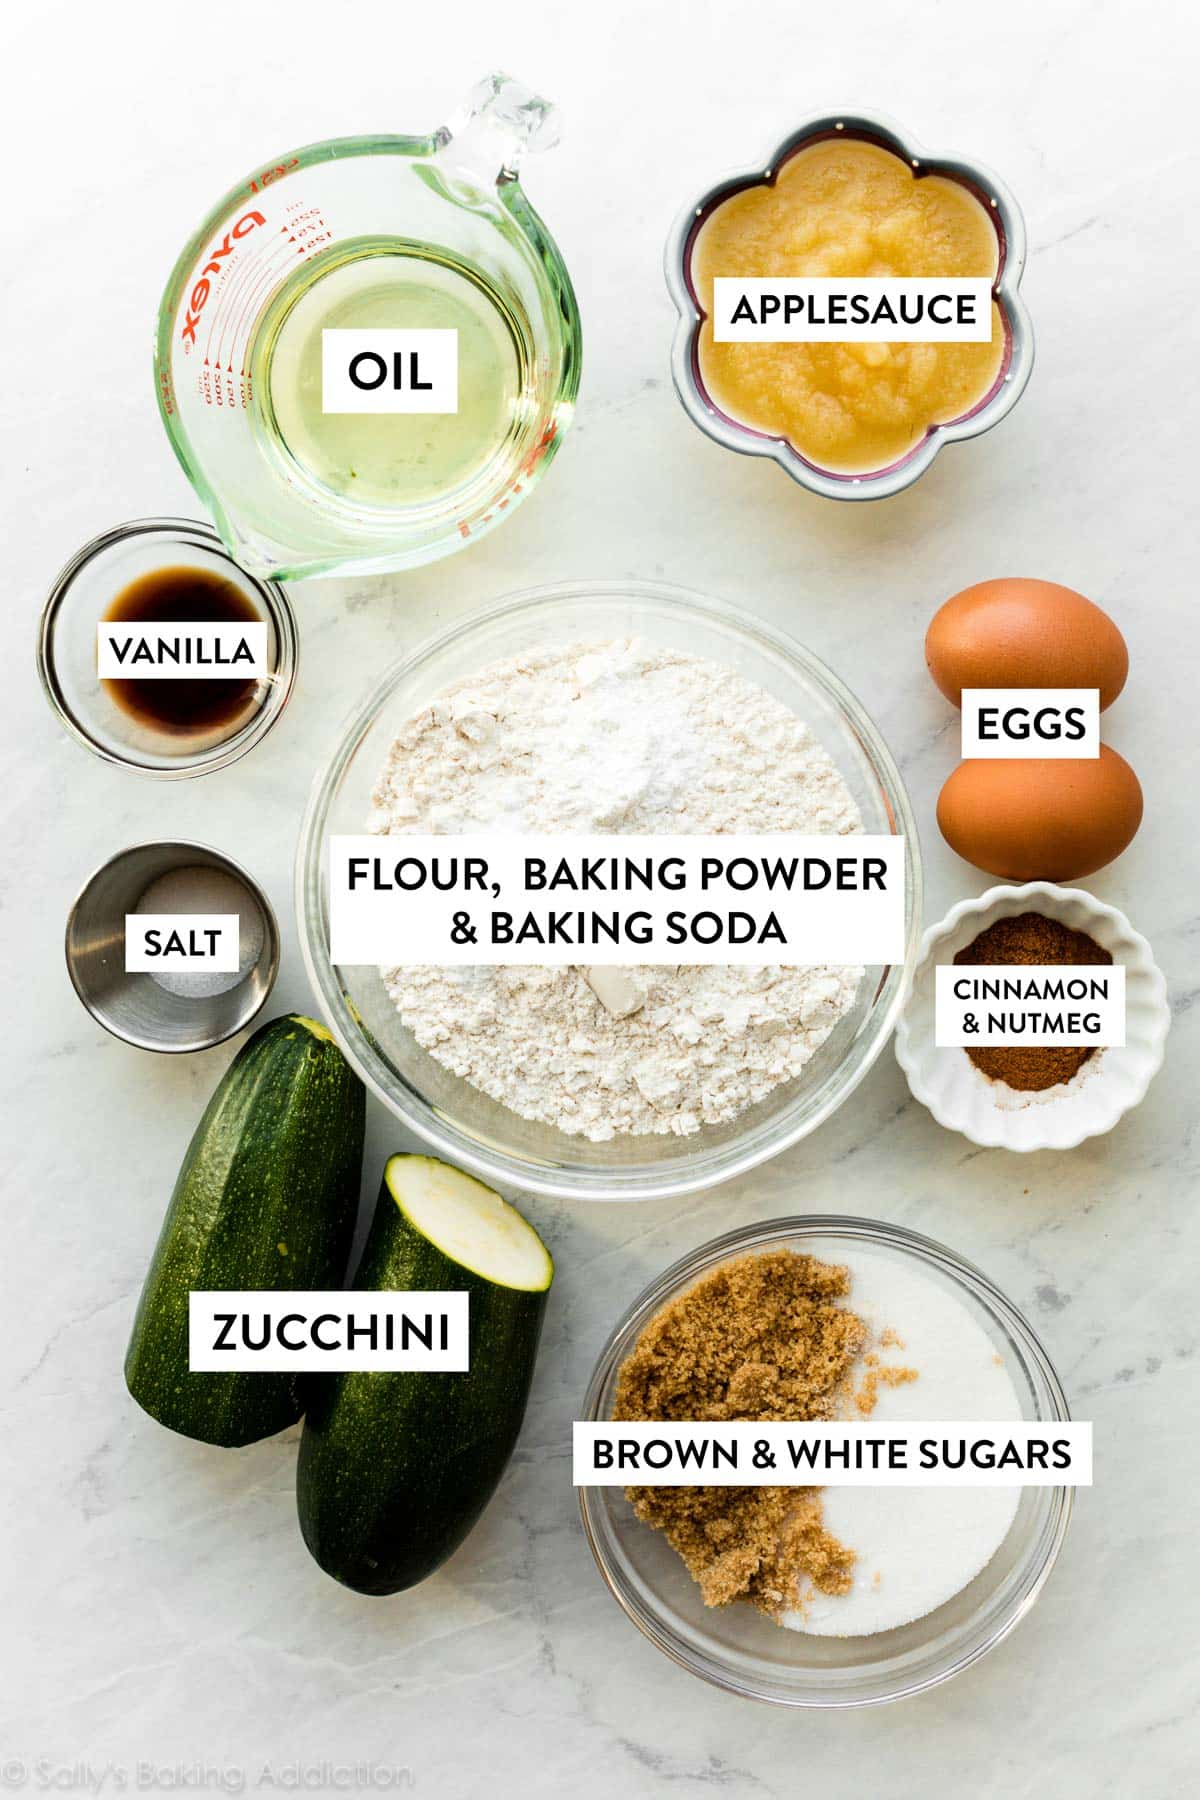 Picture showing ingredients including a bowl of flour, baking powder and baking soda plus eggs, oil and zucchini